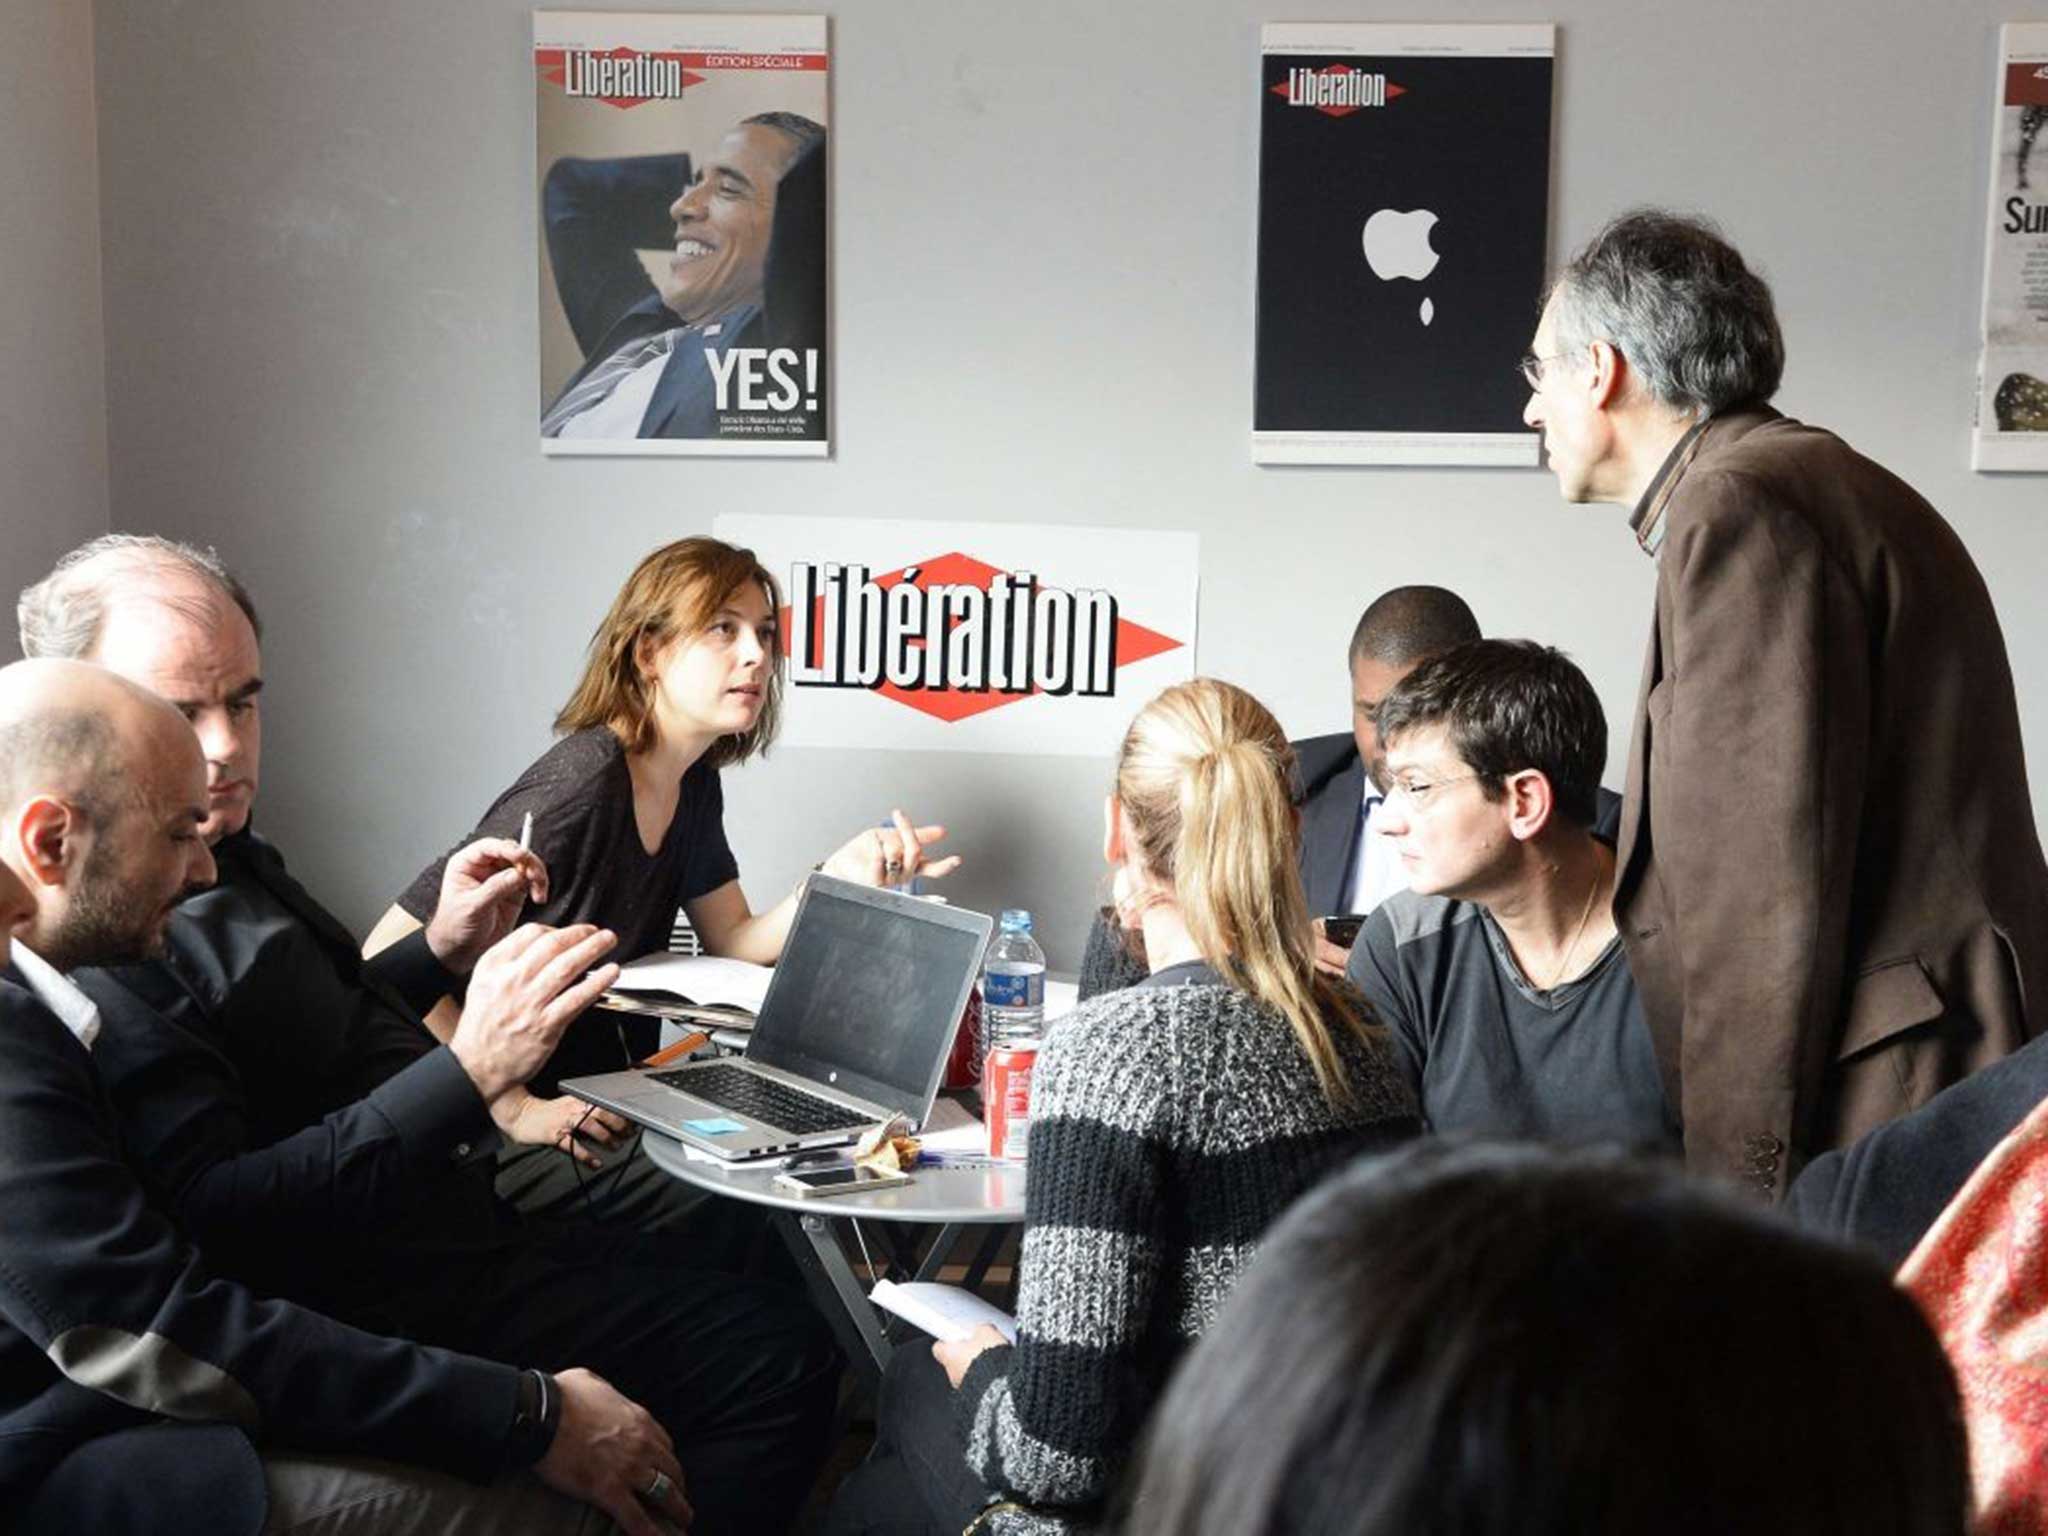 Remaining ‘Charlie Hebdo’ staff at work, in the ‘Libération’ offices, two days after last week’s shootings